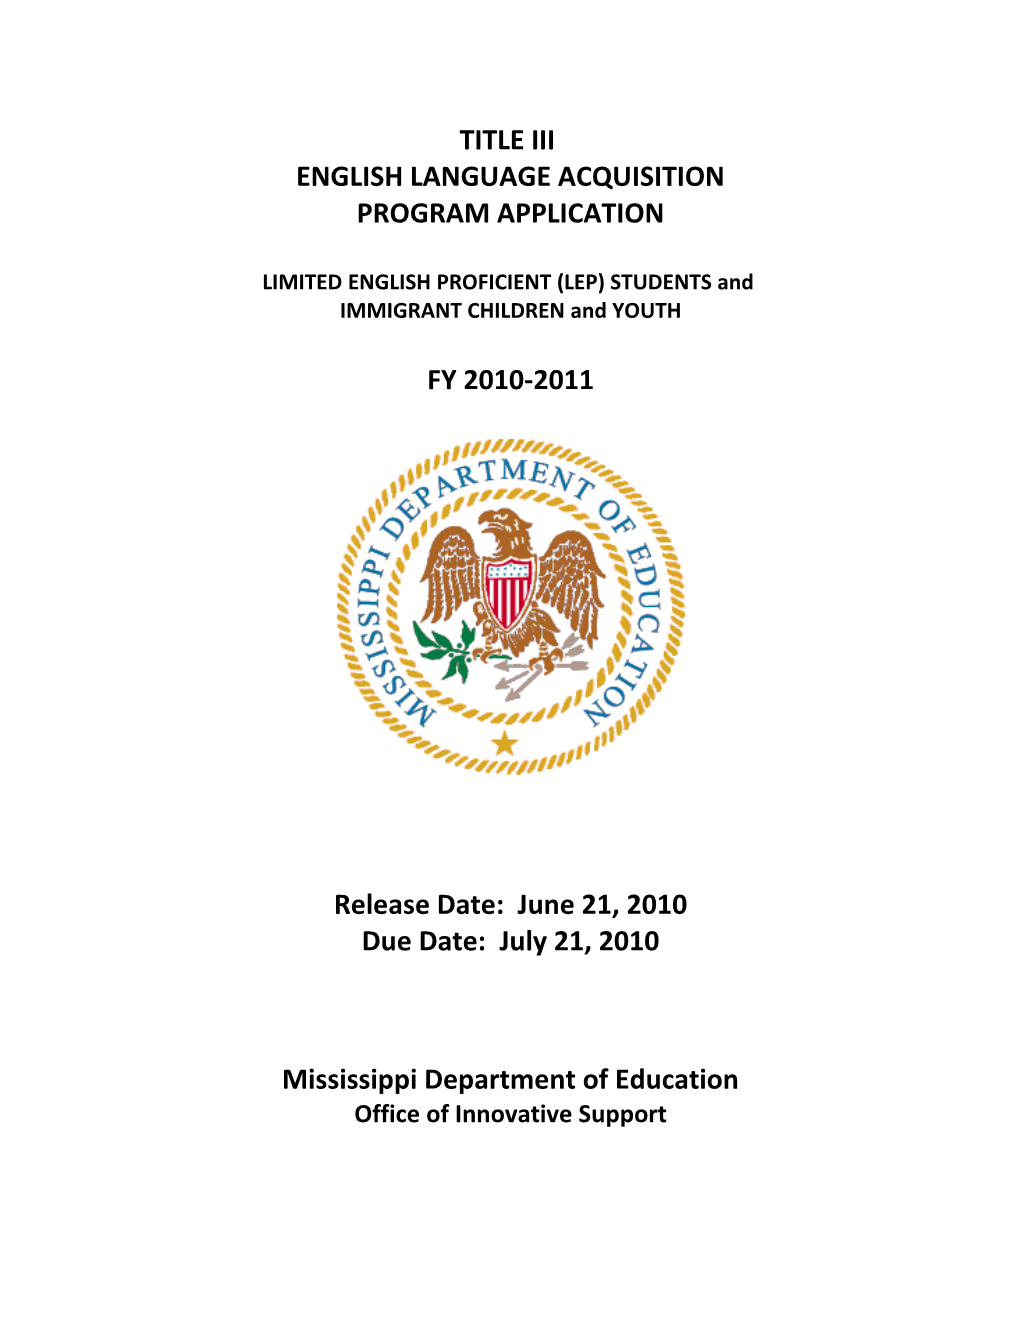 LIMITED ENGLISH PROFICIENT (LEP) STUDENTS And